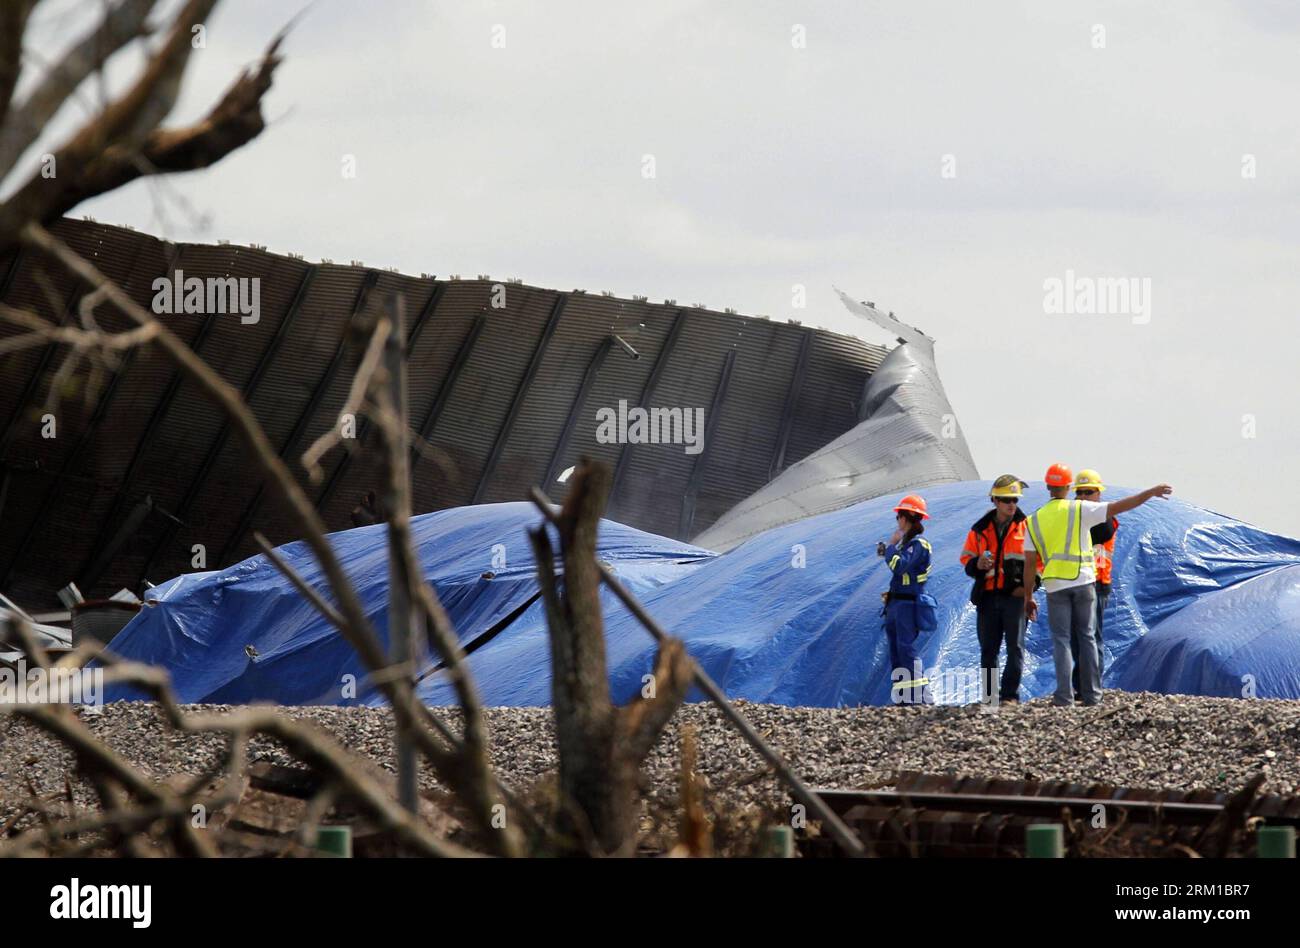 Bildnummer: 59548509  Datum: 21.04.2013  Copyright: imago/Xinhua Rescuers investigate the blast site in West, Texas, the United States, on April 21, 2013. The seat, or center of an explosion that blew off a fertilizer plant and almost razed the U.S. town of West had been located, a U.S. Official said Sunday. Assistant Texas fire marshal Kelly Kistner told a press conference here that the locationing of the center of the explosion is important to the investigation of the blast. But he said the cause of the fire and blast remained unknown. The explosion left a large crater in the middle of the p Stock Photo